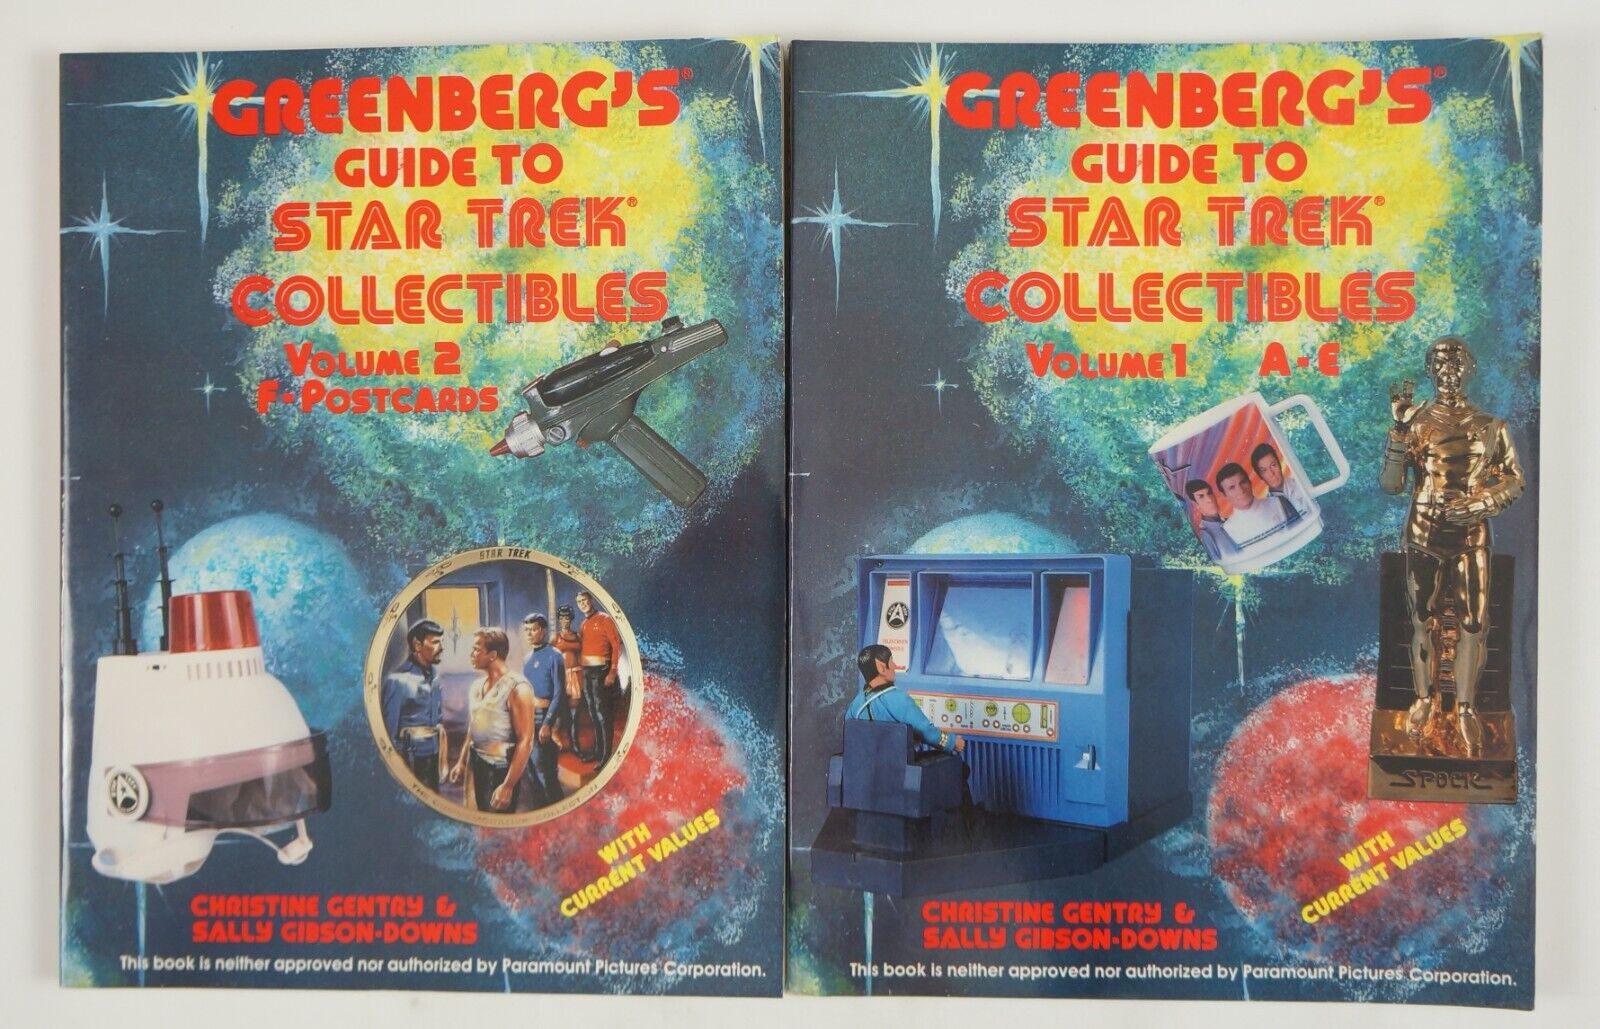 Greenberg's Guide to Star Trek Collectibles Volume 1: A-E & 2: F-Postcards 1991